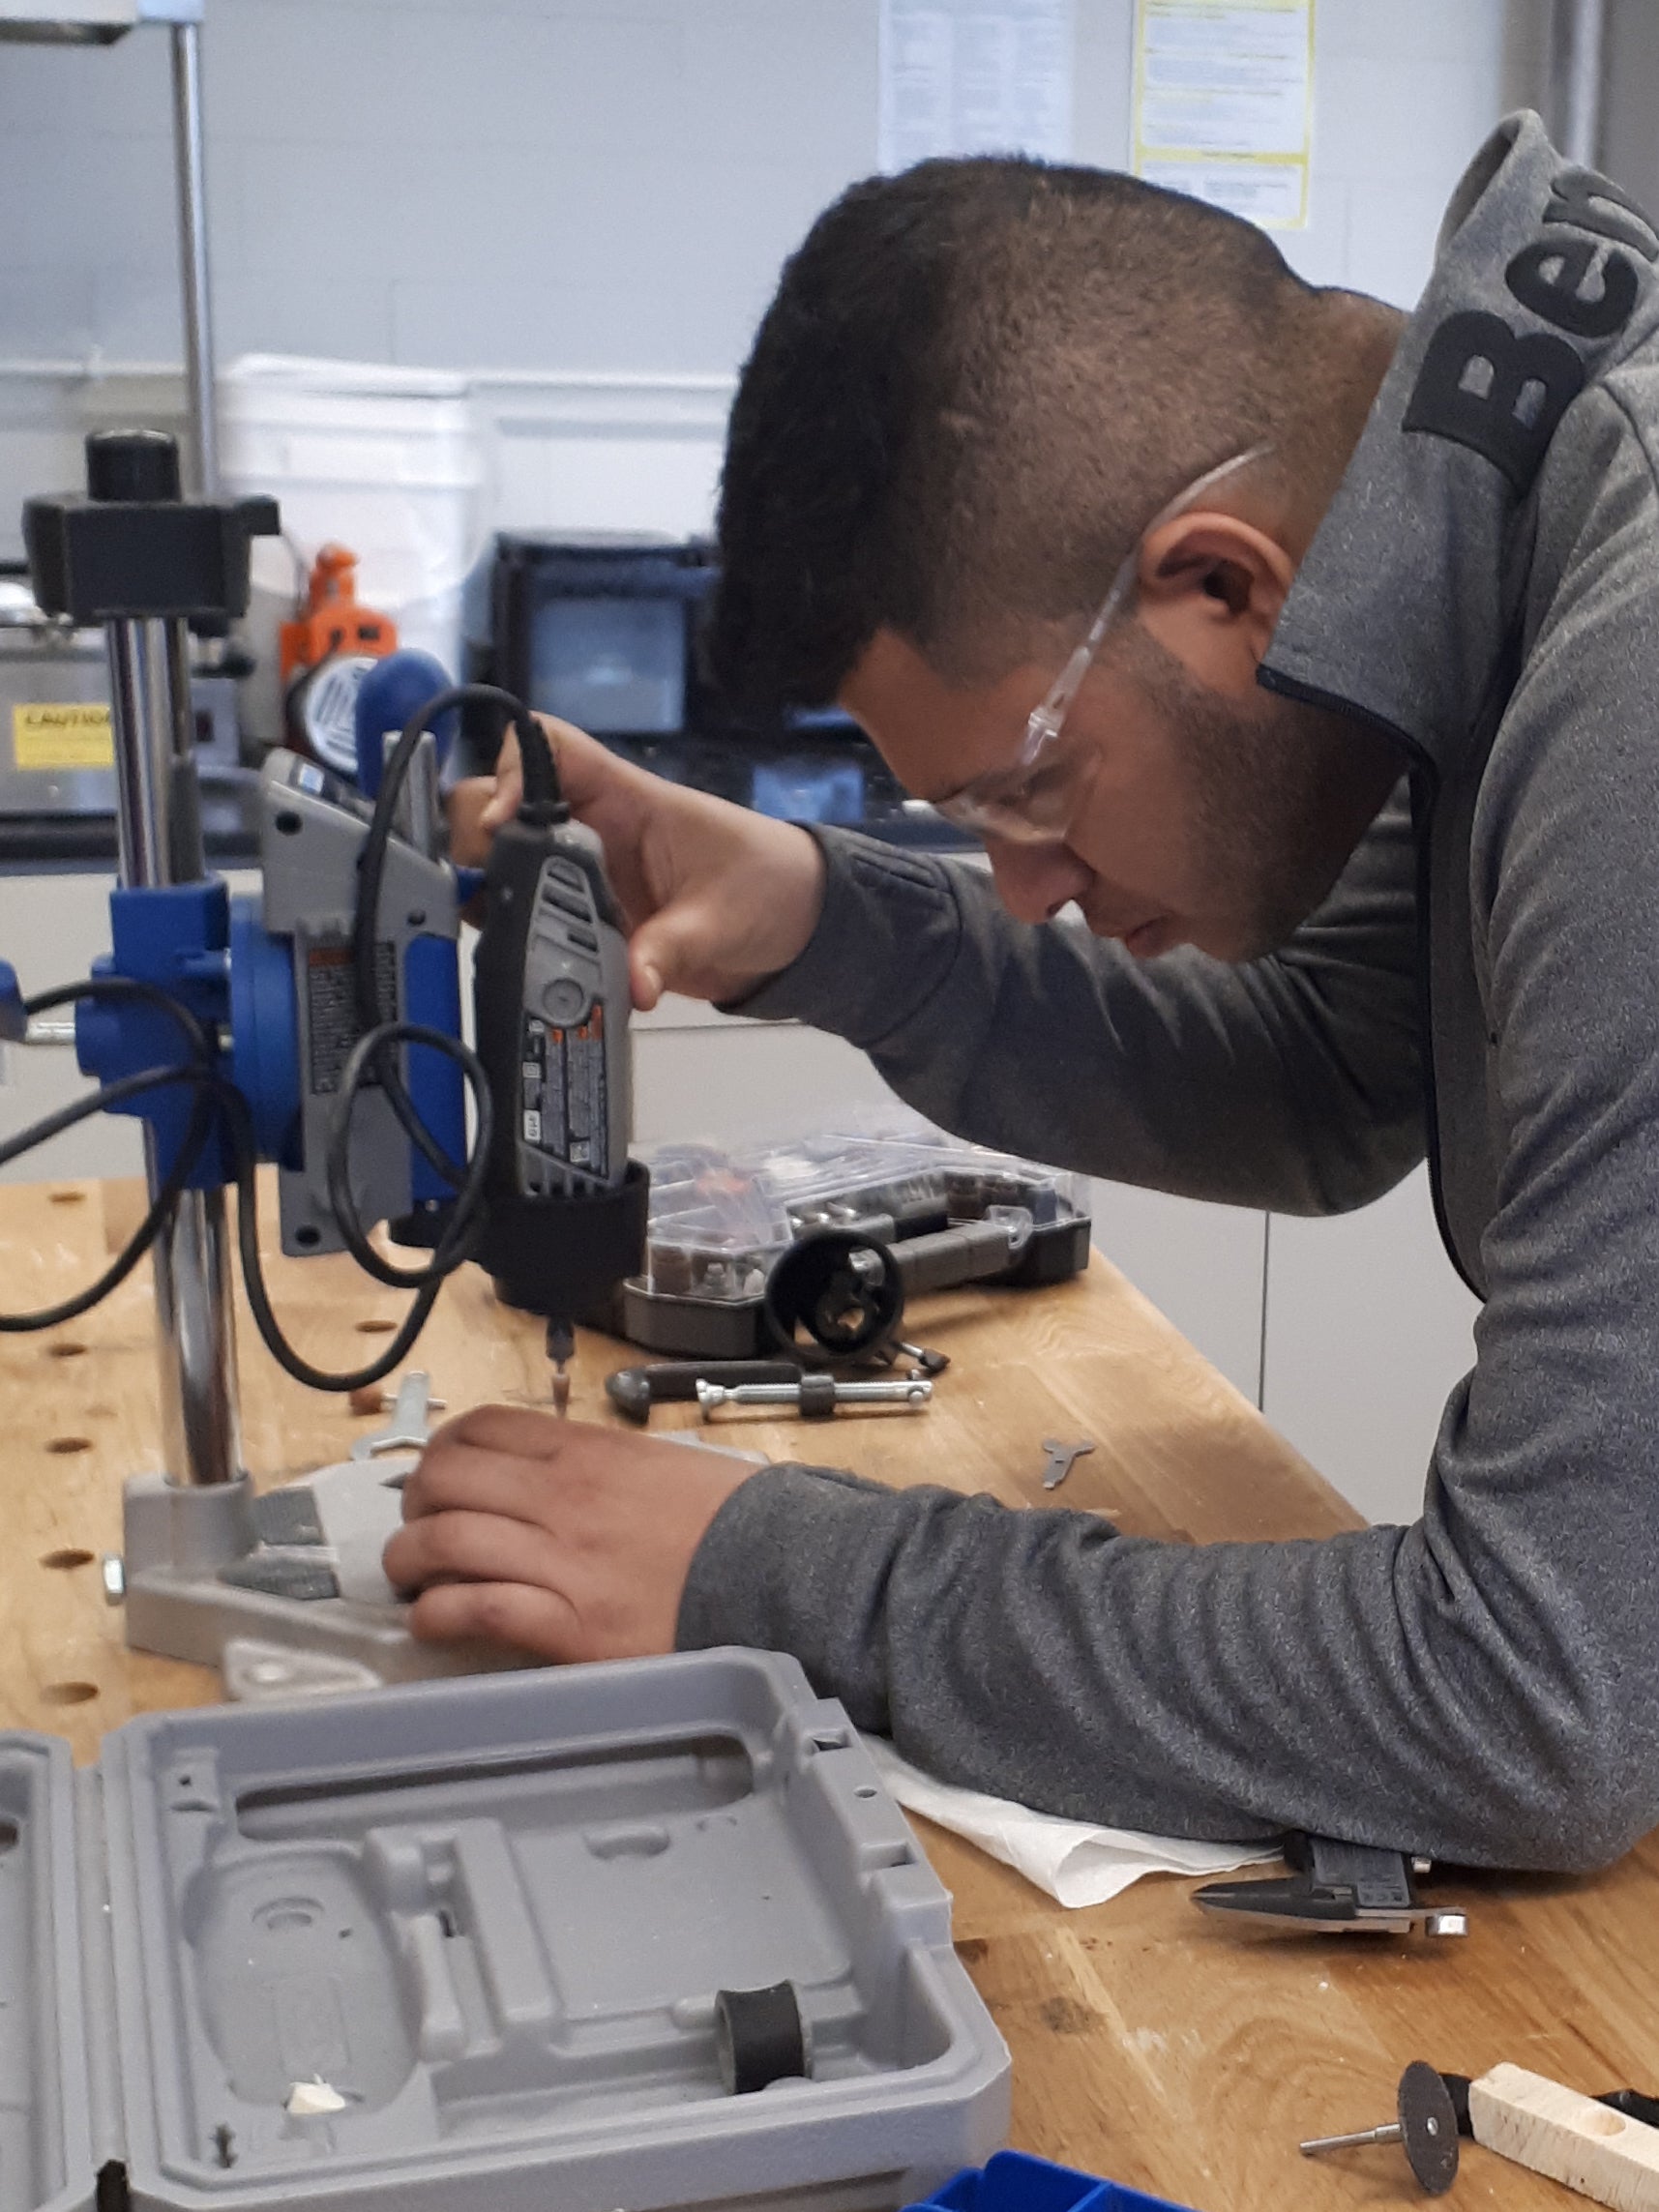 Student focused on working with a Dremel 3000 rotary tool